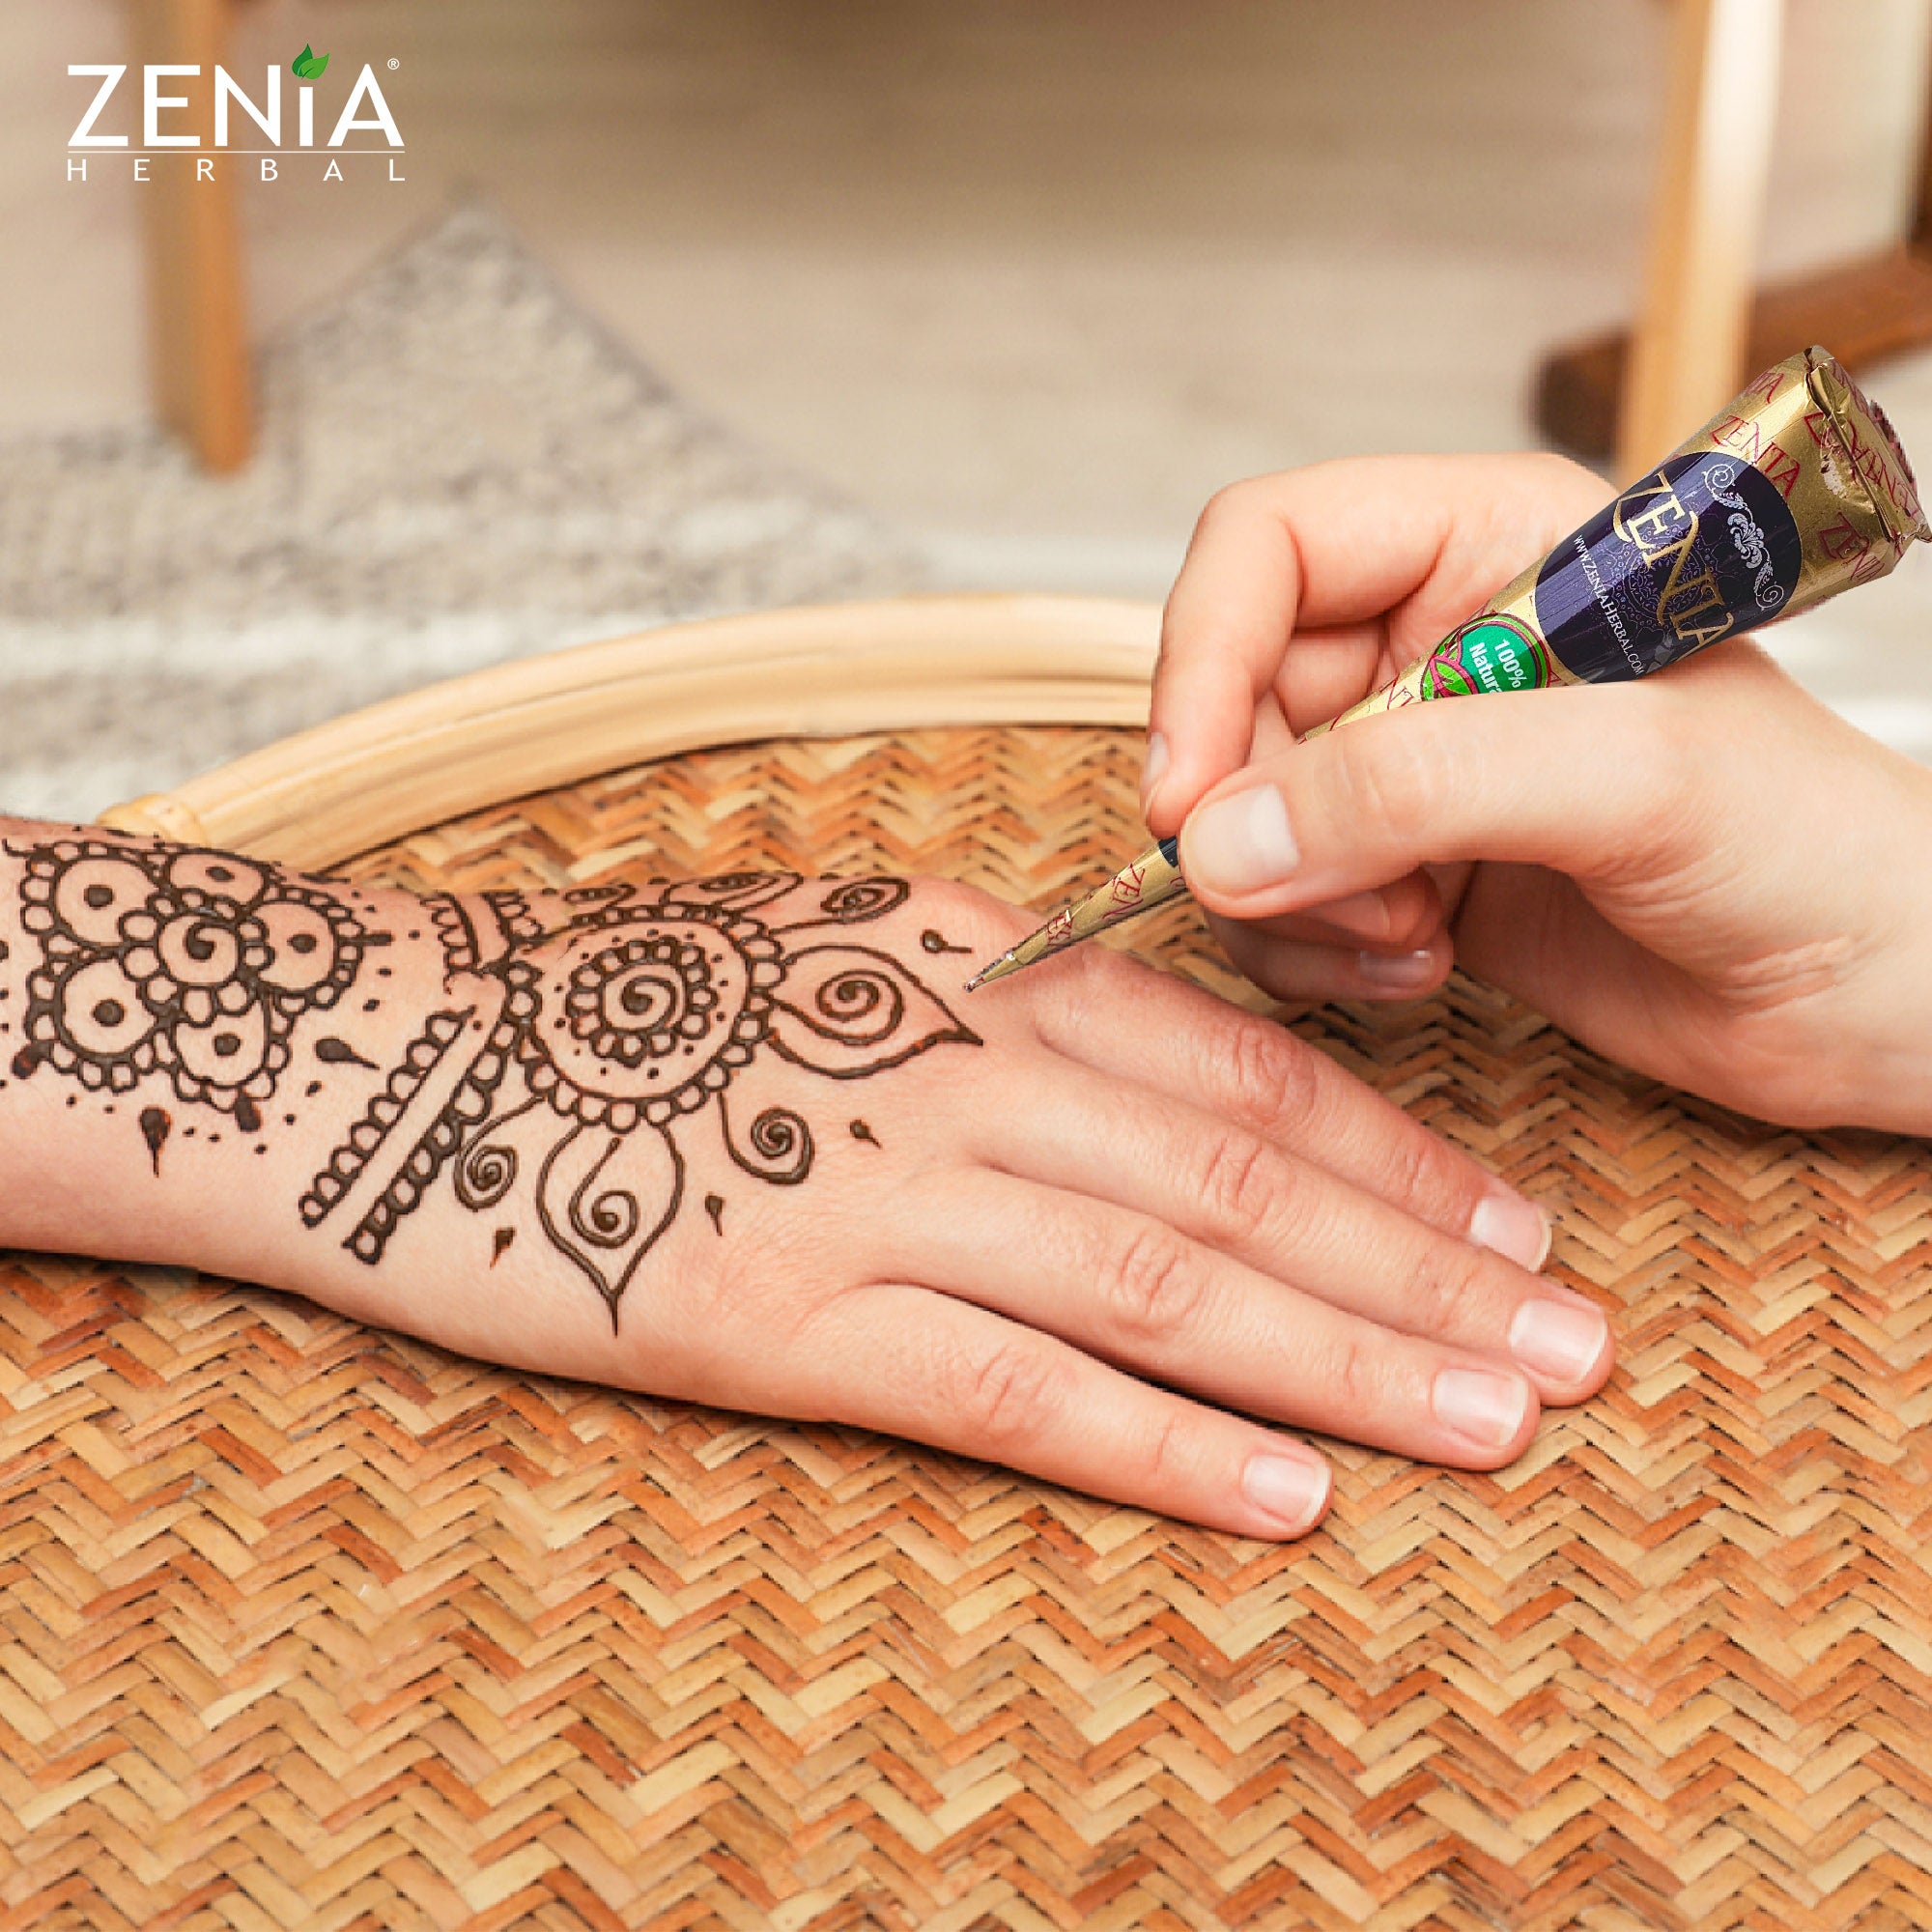 Pack of 24 Zenia 100% Natural Henna Cones Mehndi Cones For Temporary Body Art Tattoo Freckles